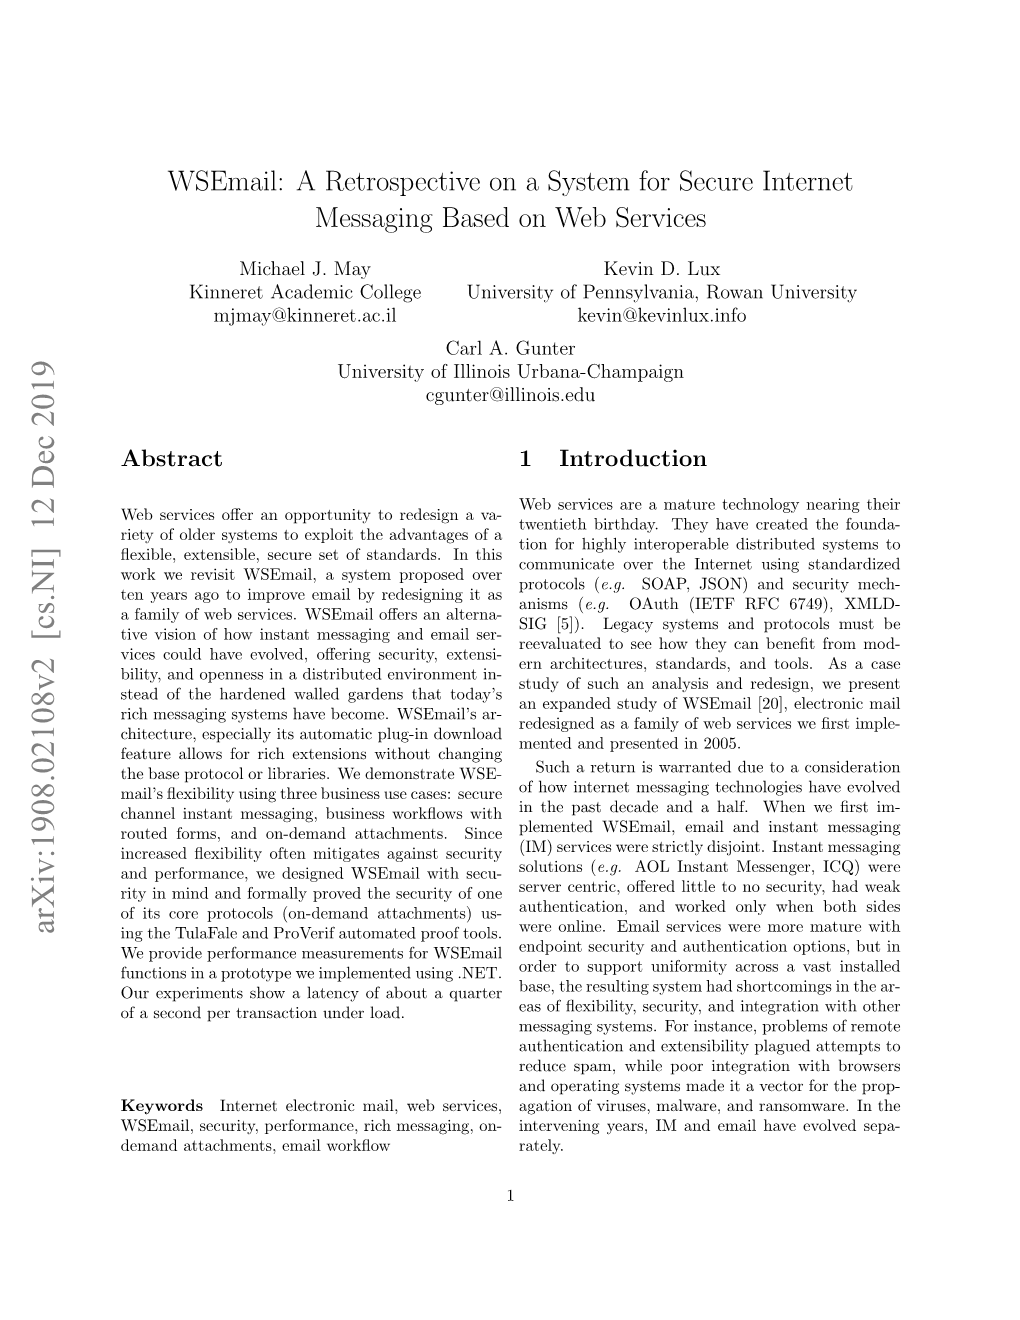 Wsemail: a Retrospective on a System for Secure Internet Messaging Based on Web Services